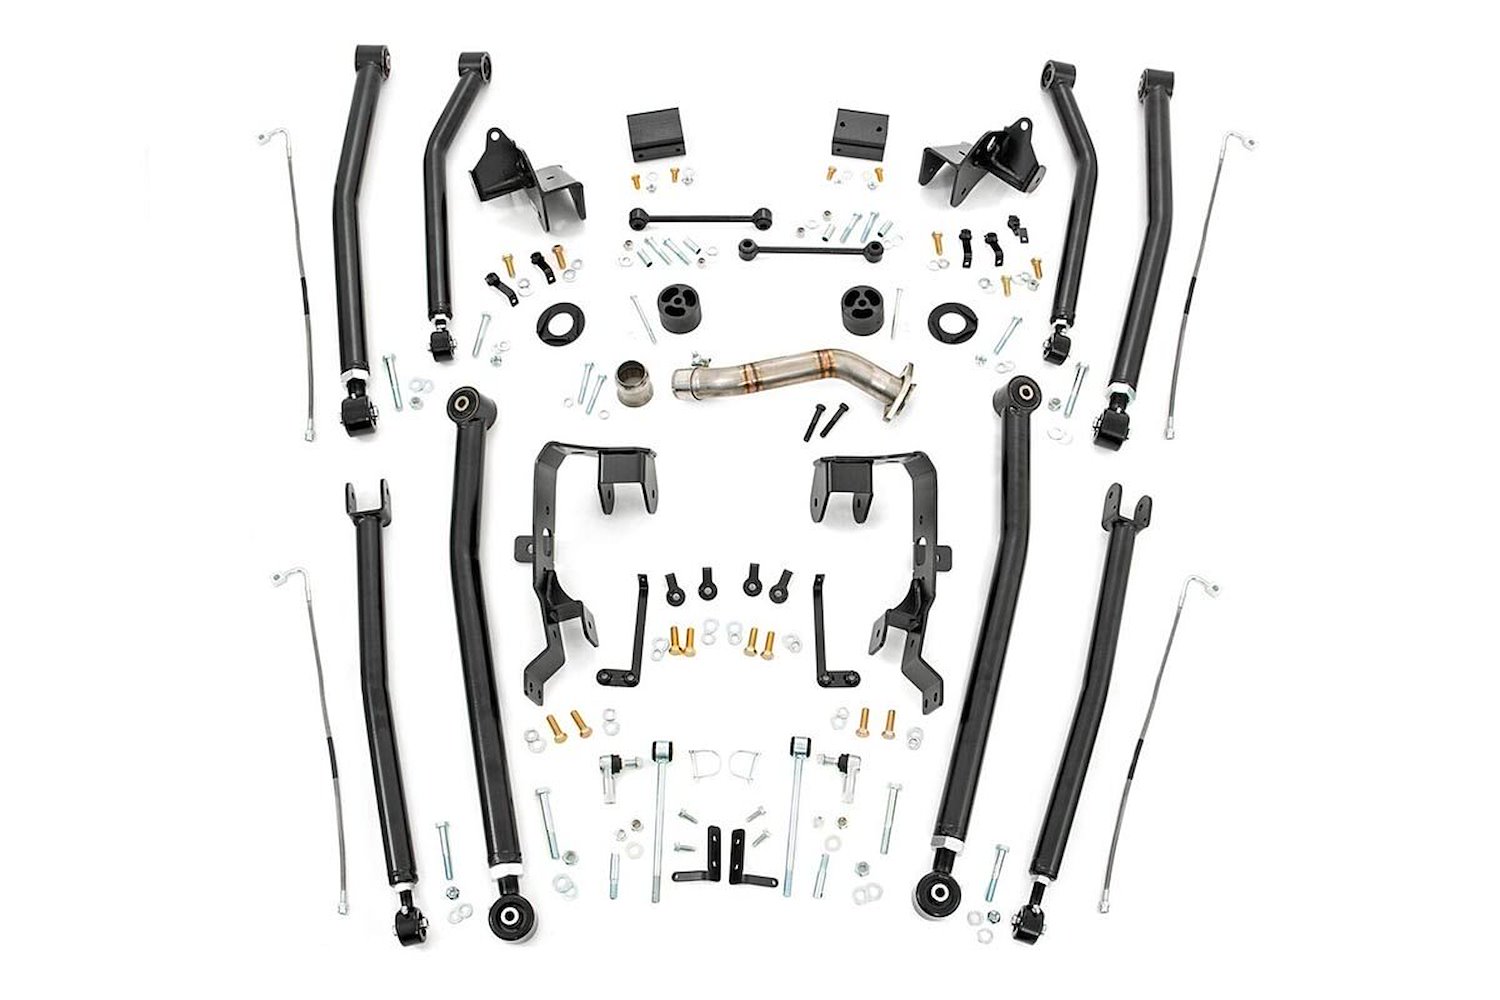 78600U Control Arm Upgrade Kit; 4 in.; Front/Rear/Upper/Lower; Adjustable Flex Joints w/Cleveite Rubber Bushings; Durable Heavy